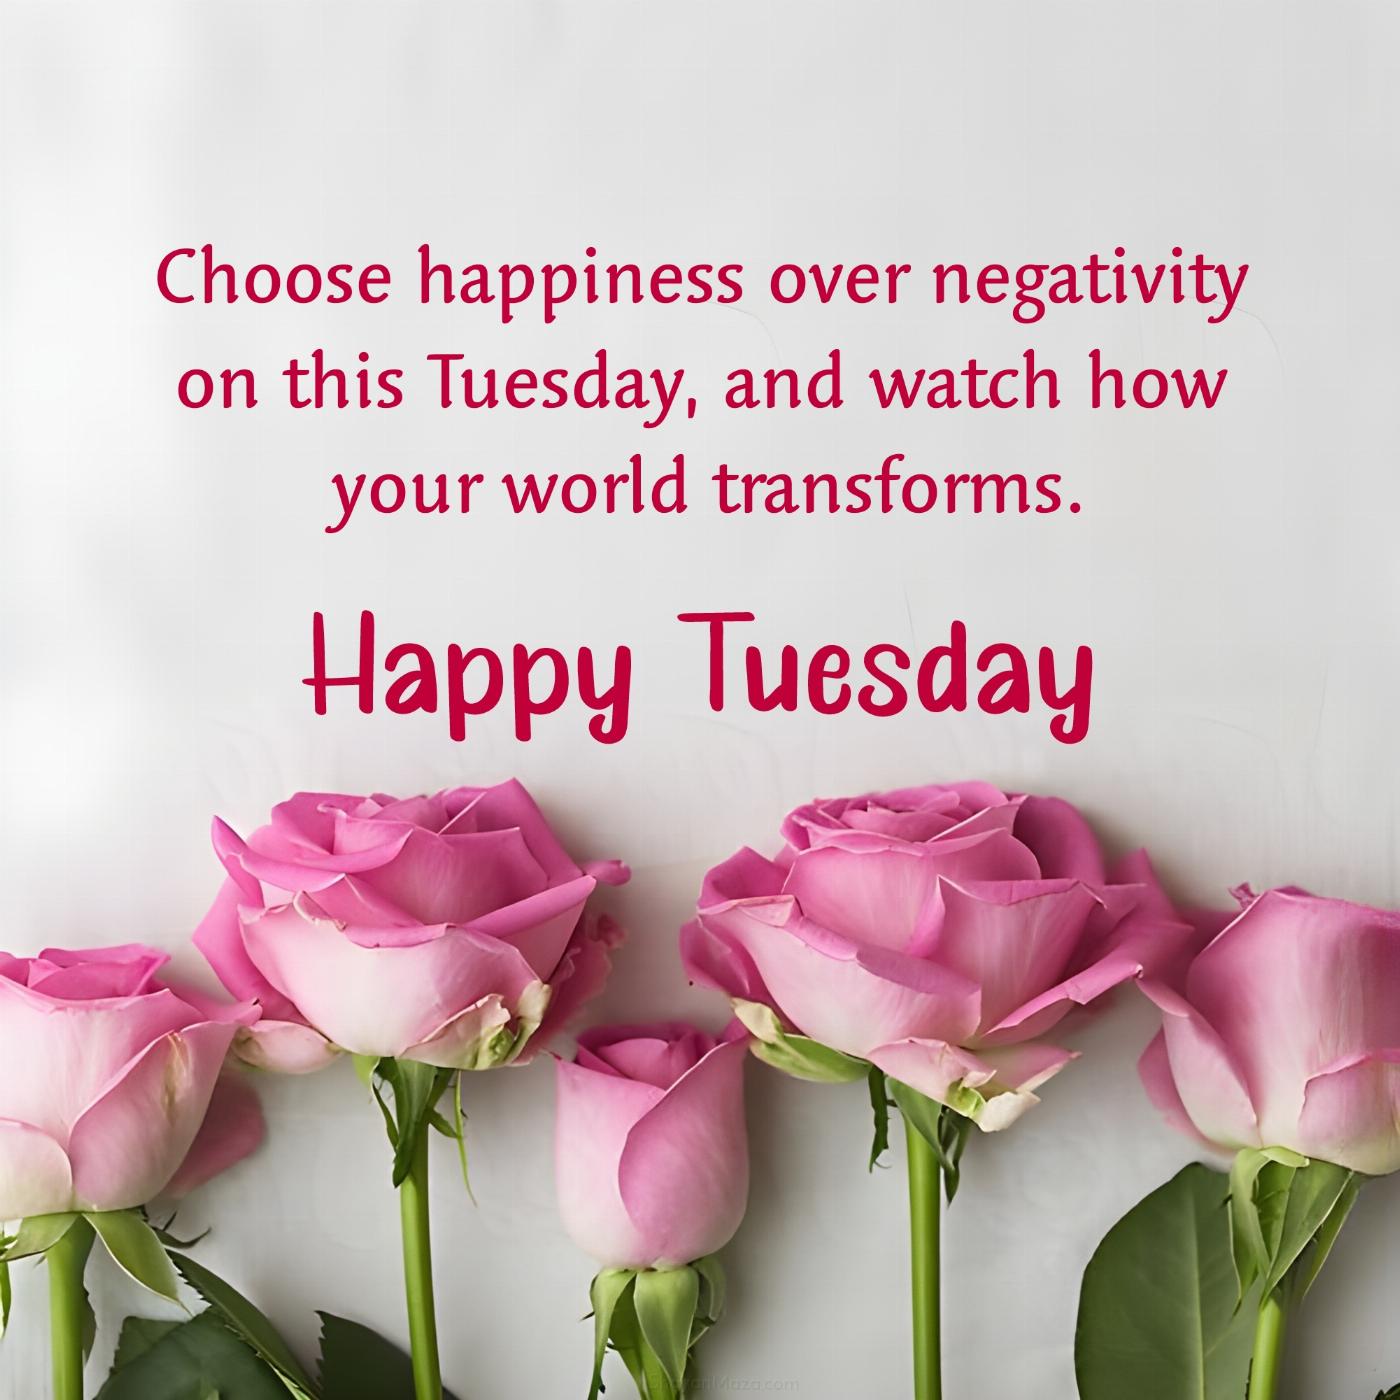 Choose happiness over negativity on this Tuesday